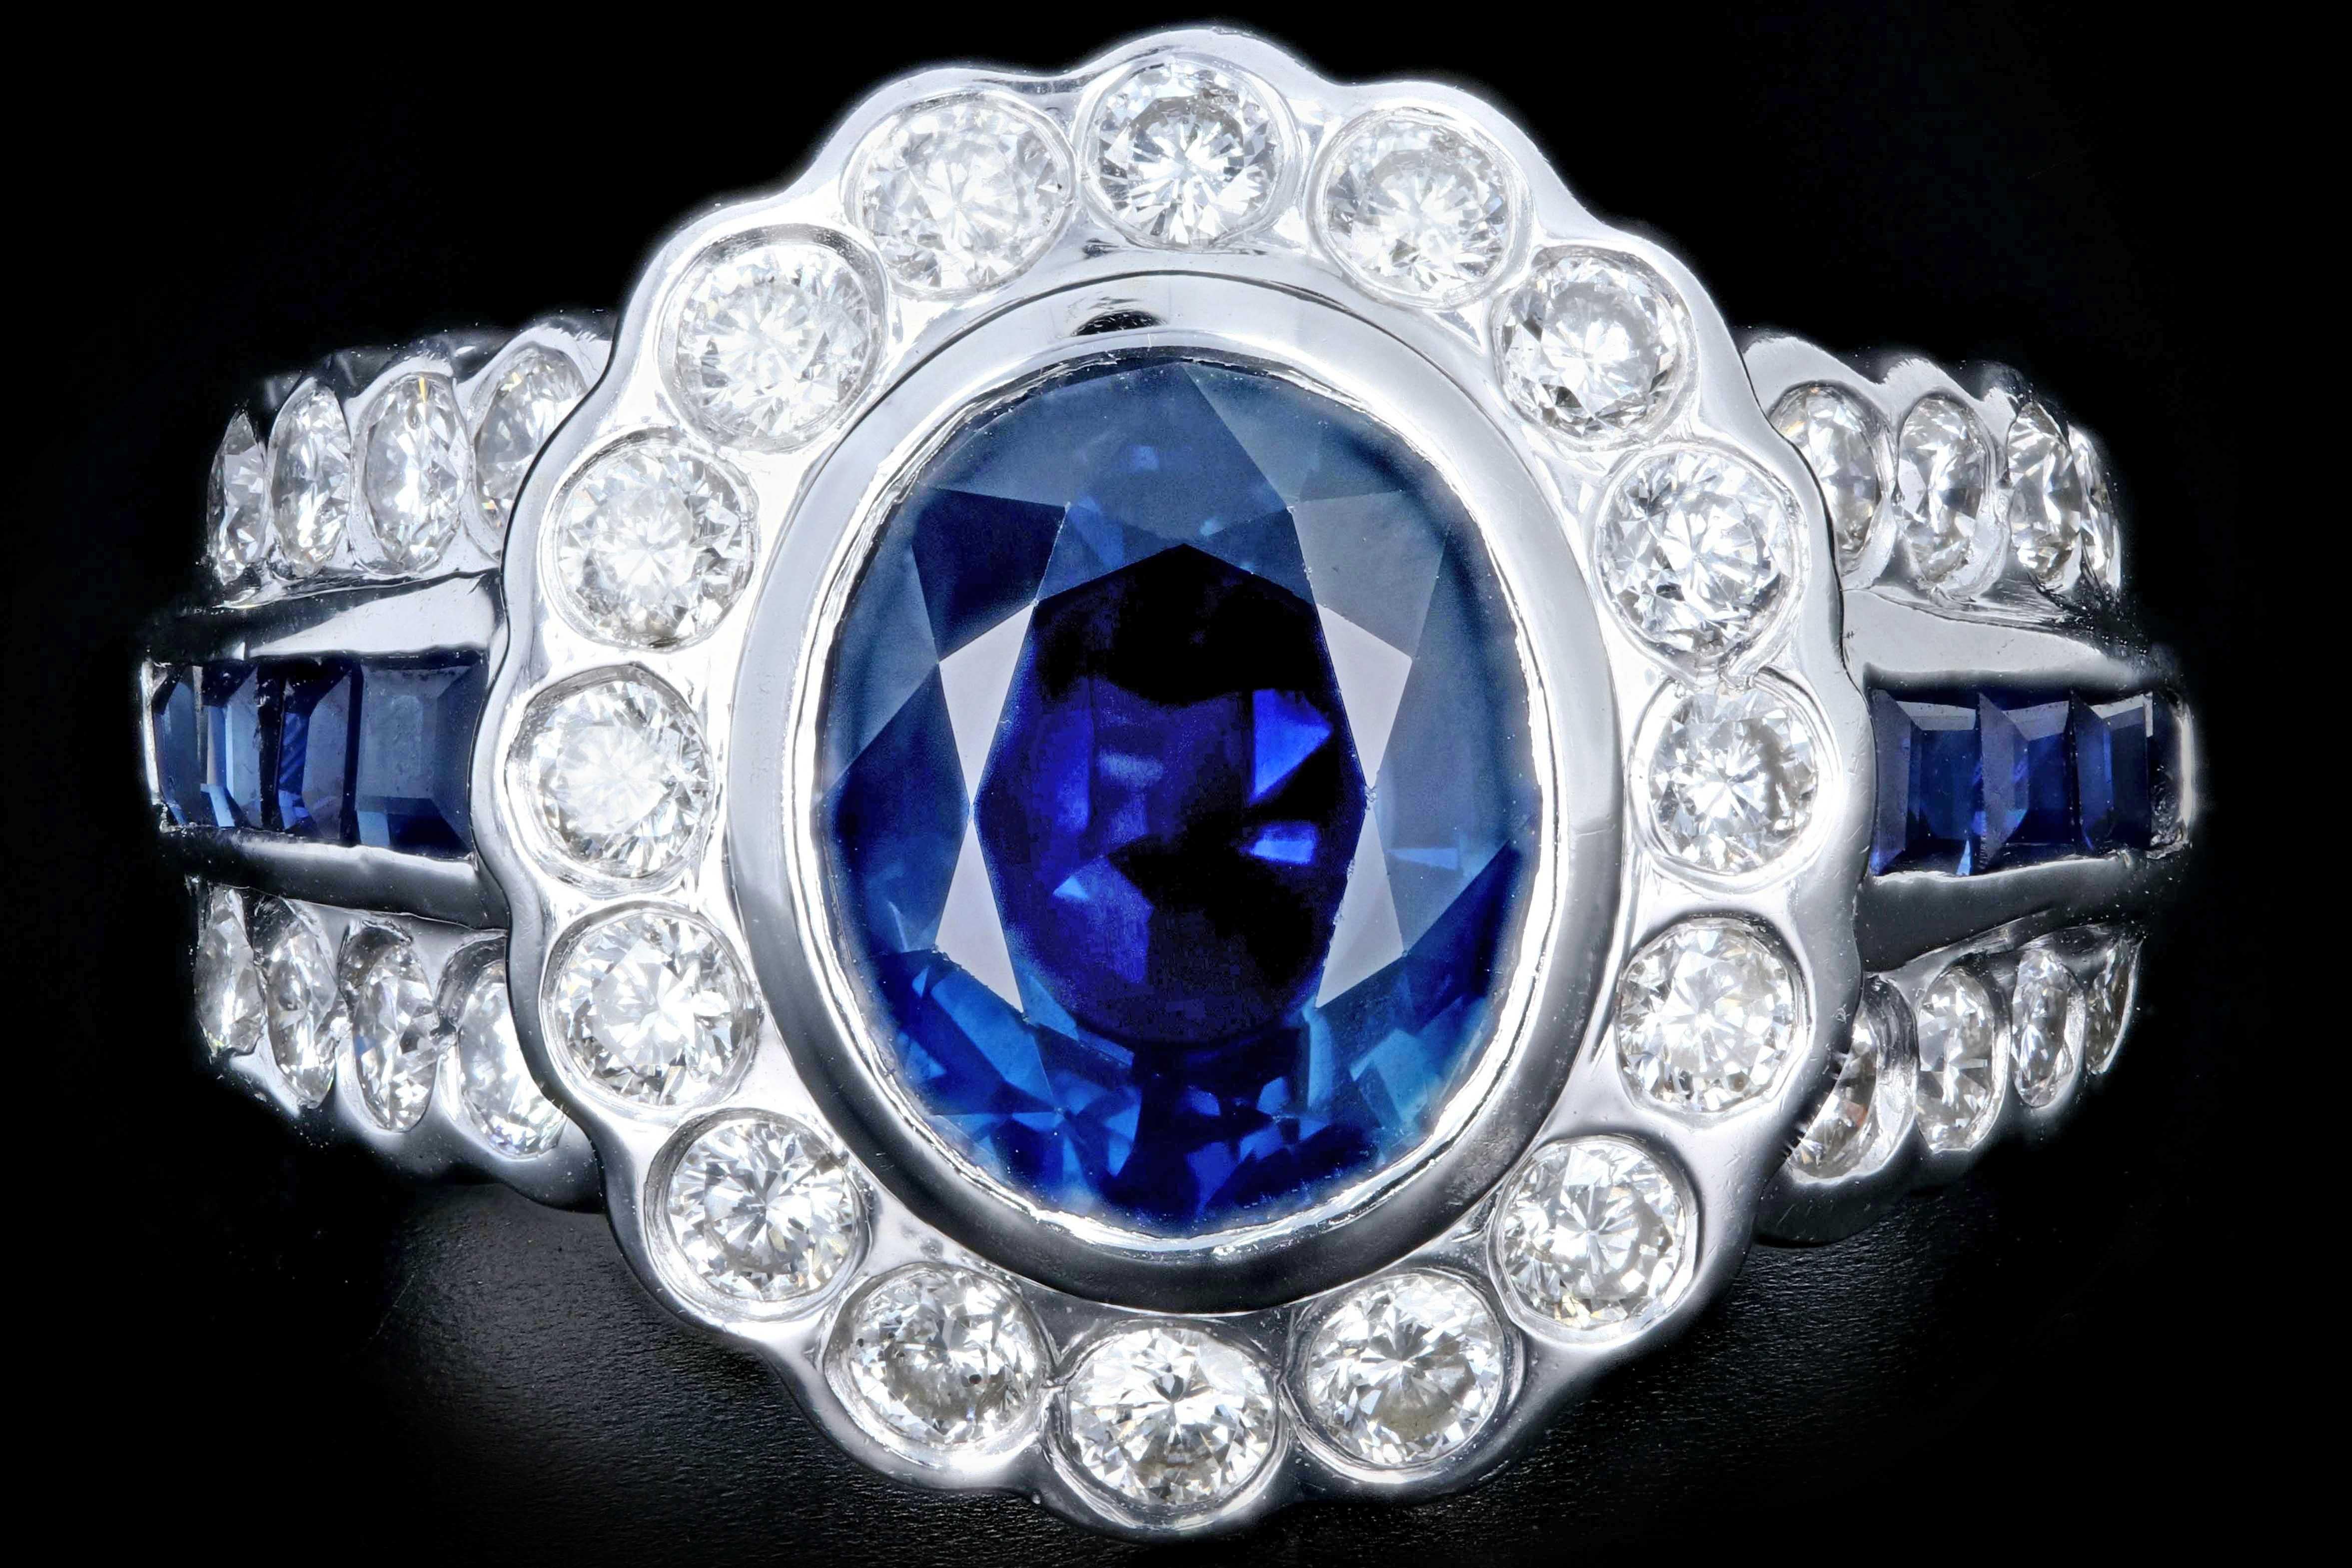 Era: Modern

Composition: 14k white gold 

Primary Stone: approximately 2.5CT natural oval cut sapphire

Primary Stone Weight: Additional approx .5ctw sapphires on sides square step cut

Accent Stone: Round brilliant cut diamonds 

Accent Stone